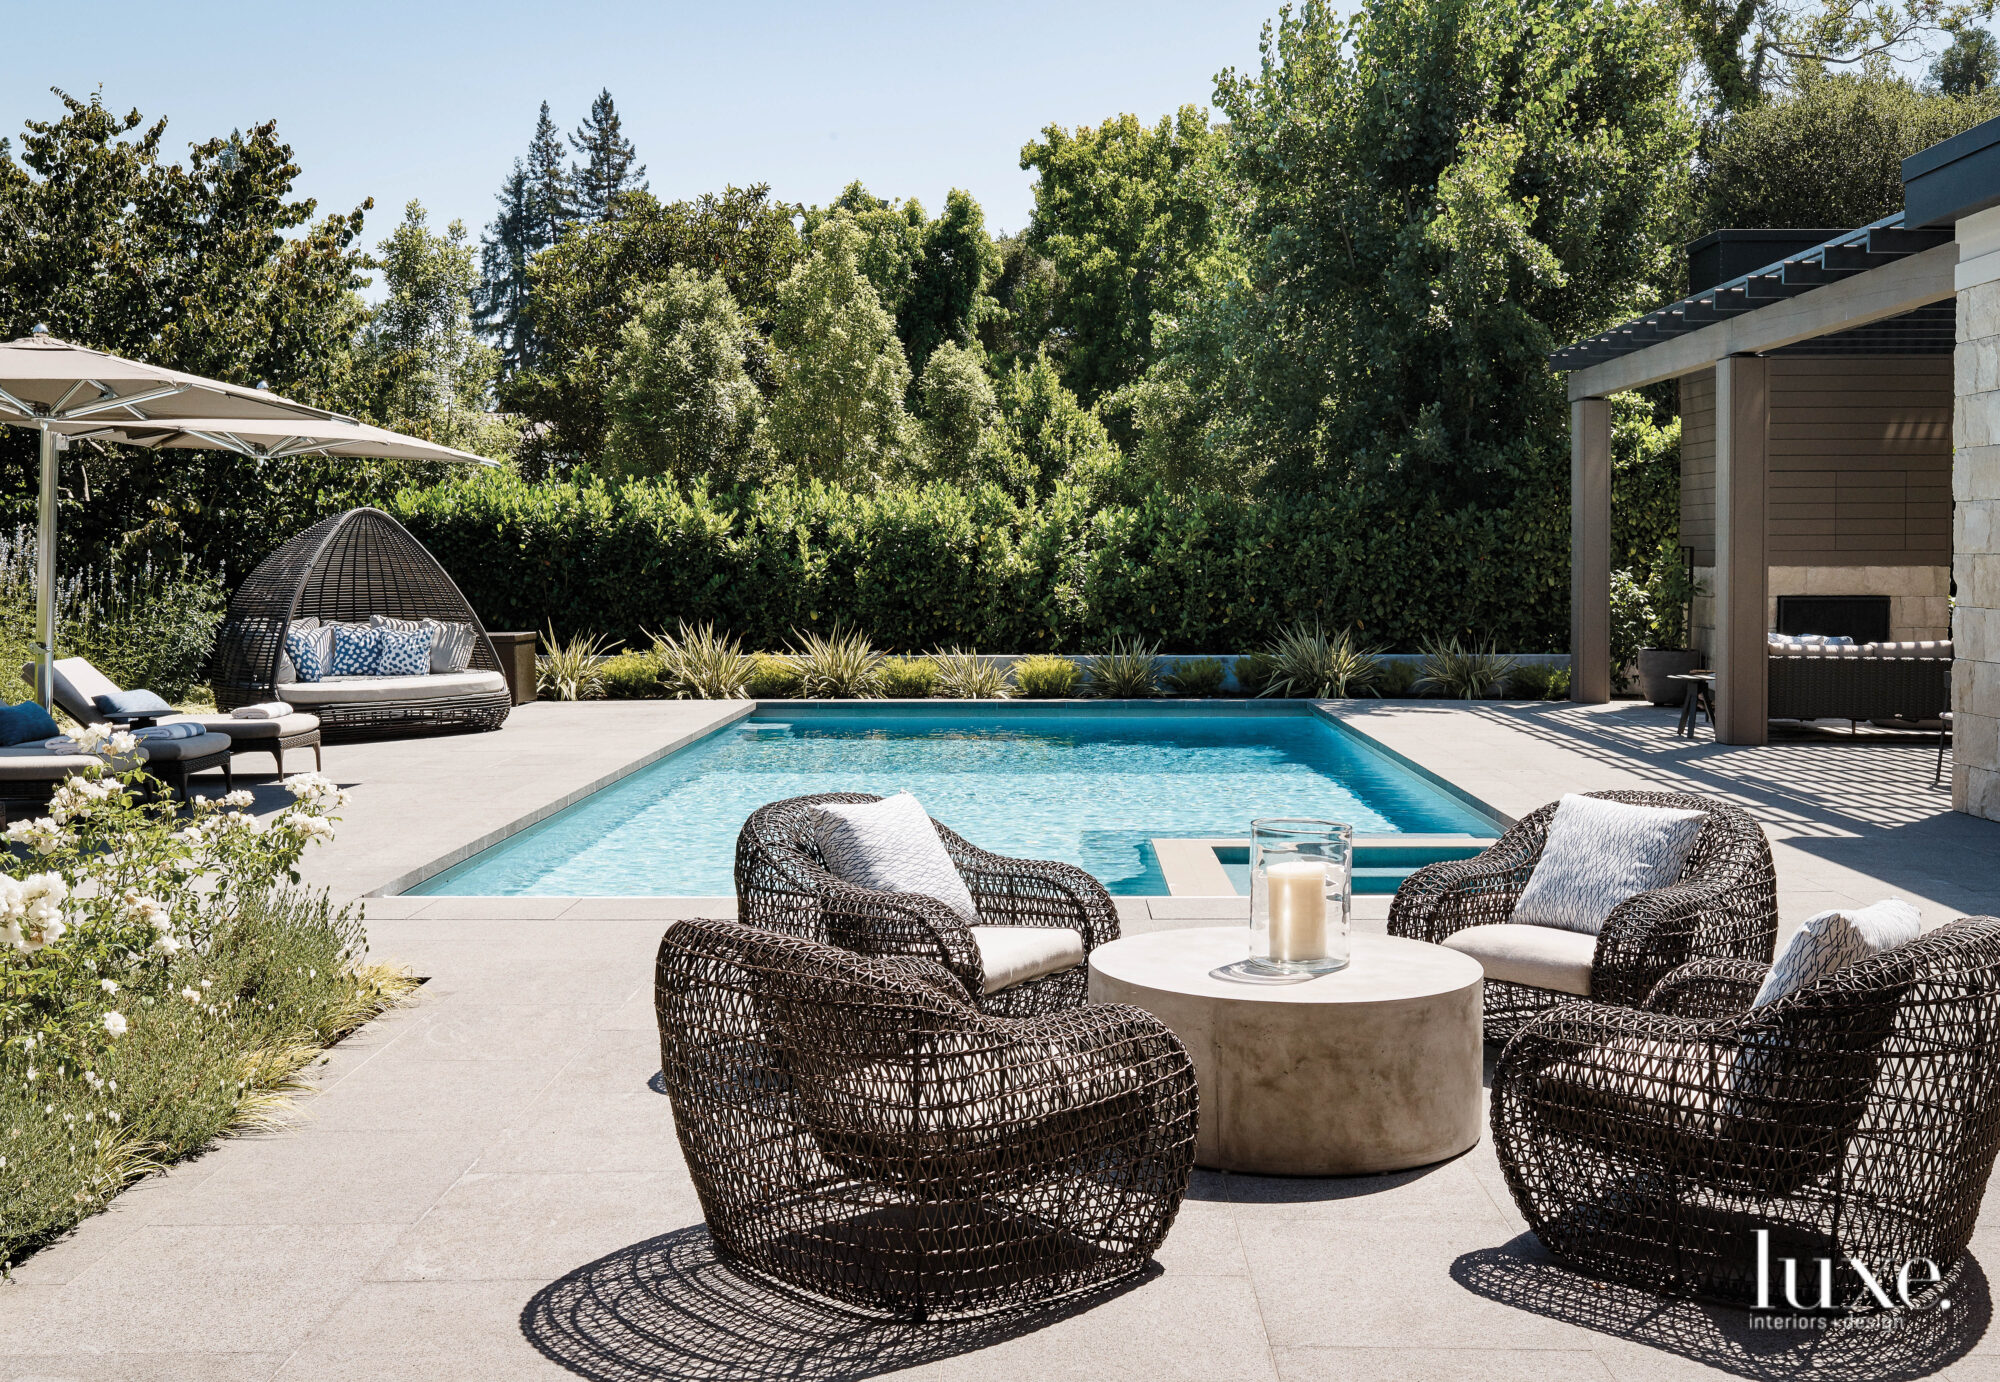 A pool has an entertaining area beside it outfitted with a circle of four lounge chairs.